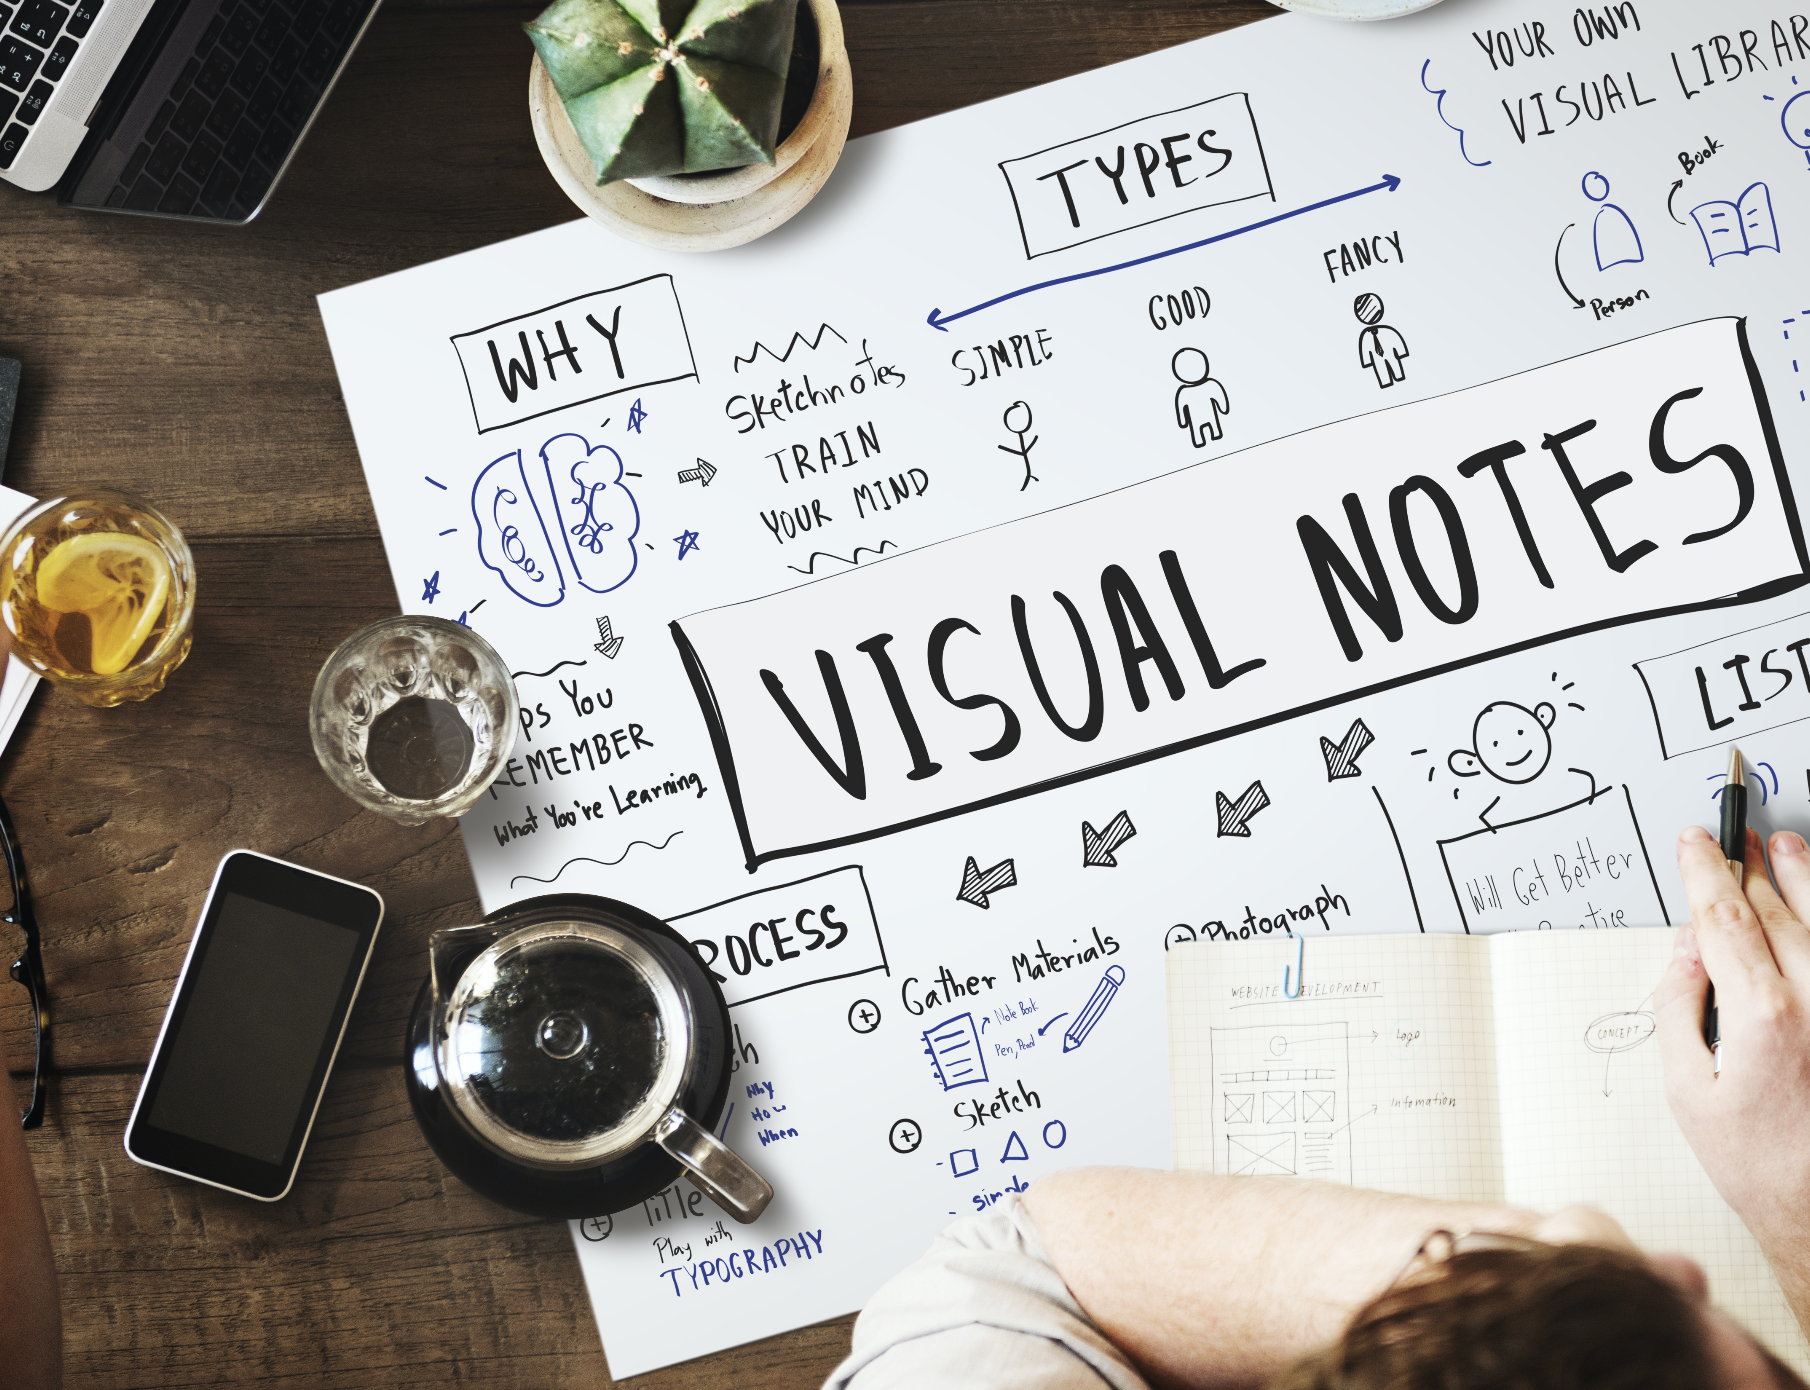 A piece of paper features doodles for rebranding a company and the words, "Visual notes."